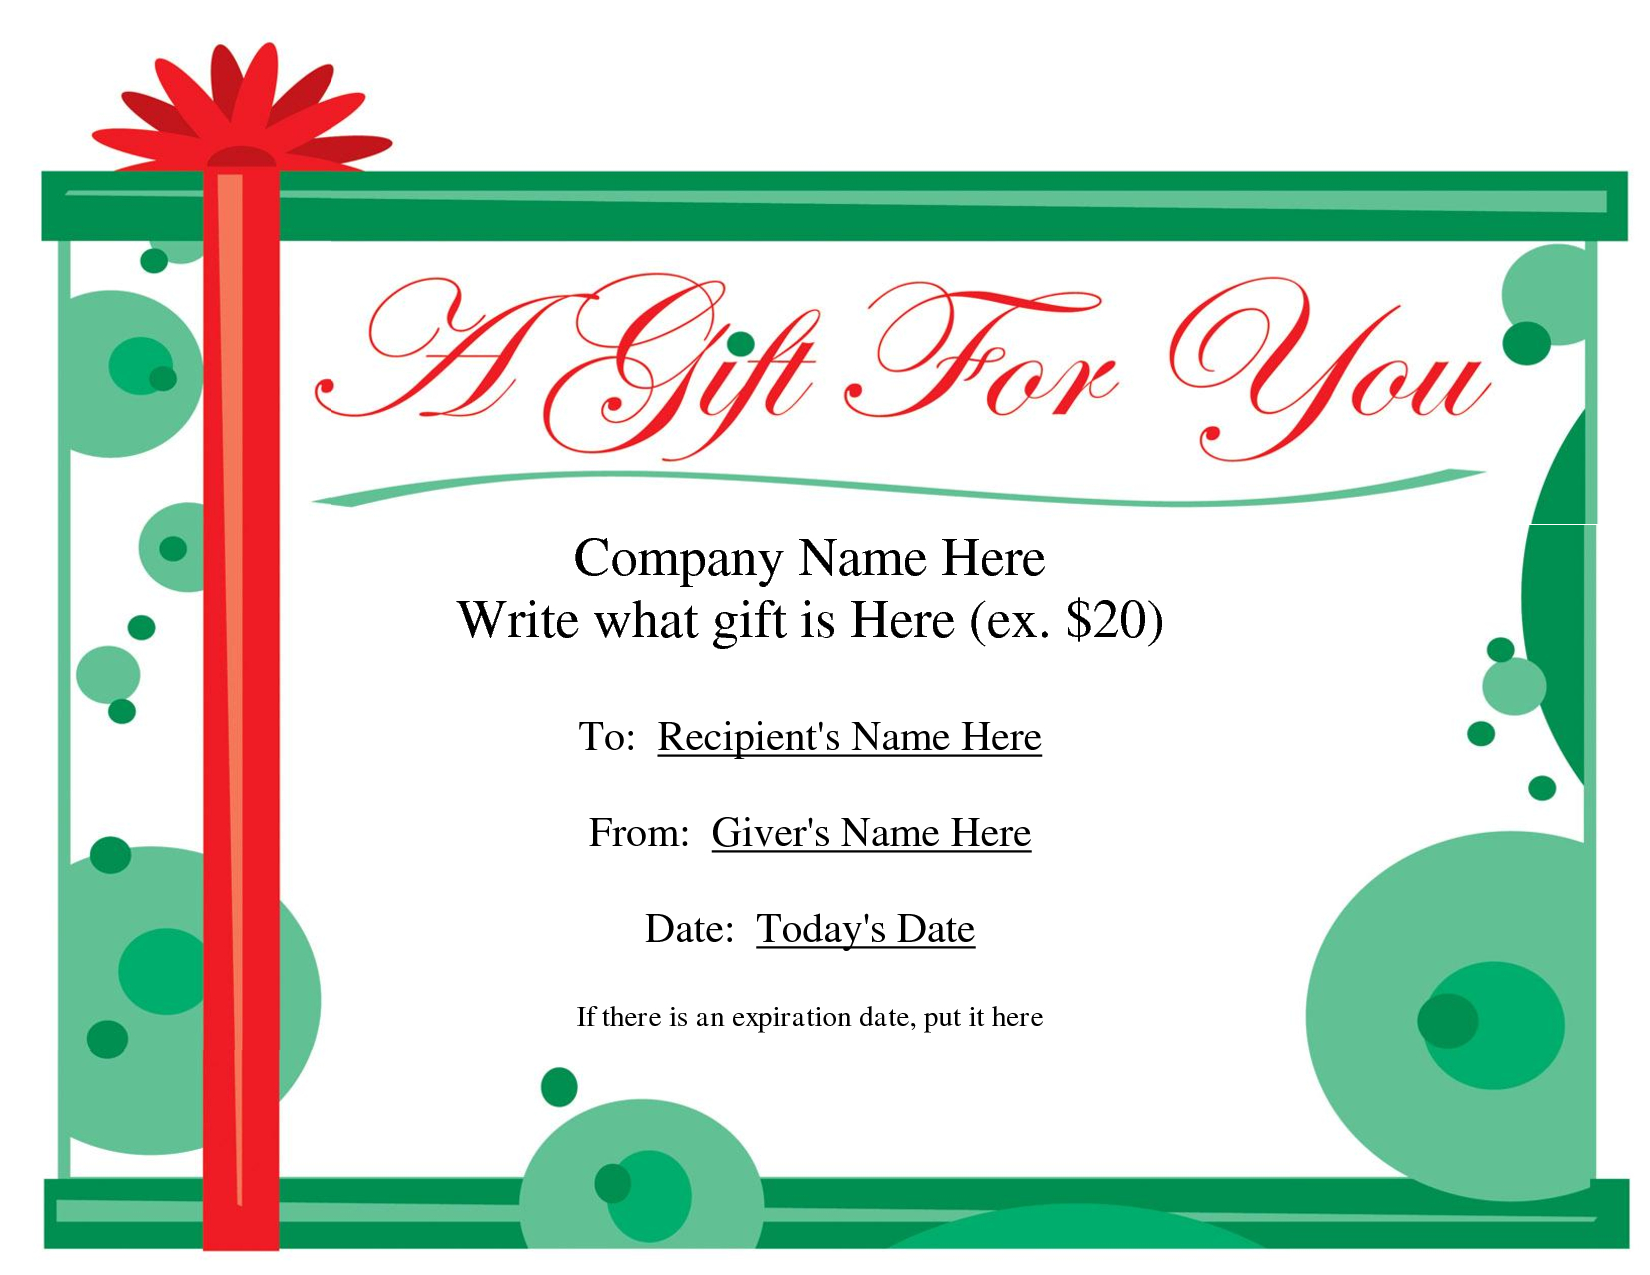 Free Christmas Gift Certificate Templates | Ideas For The House - Free Printable Gift Cards